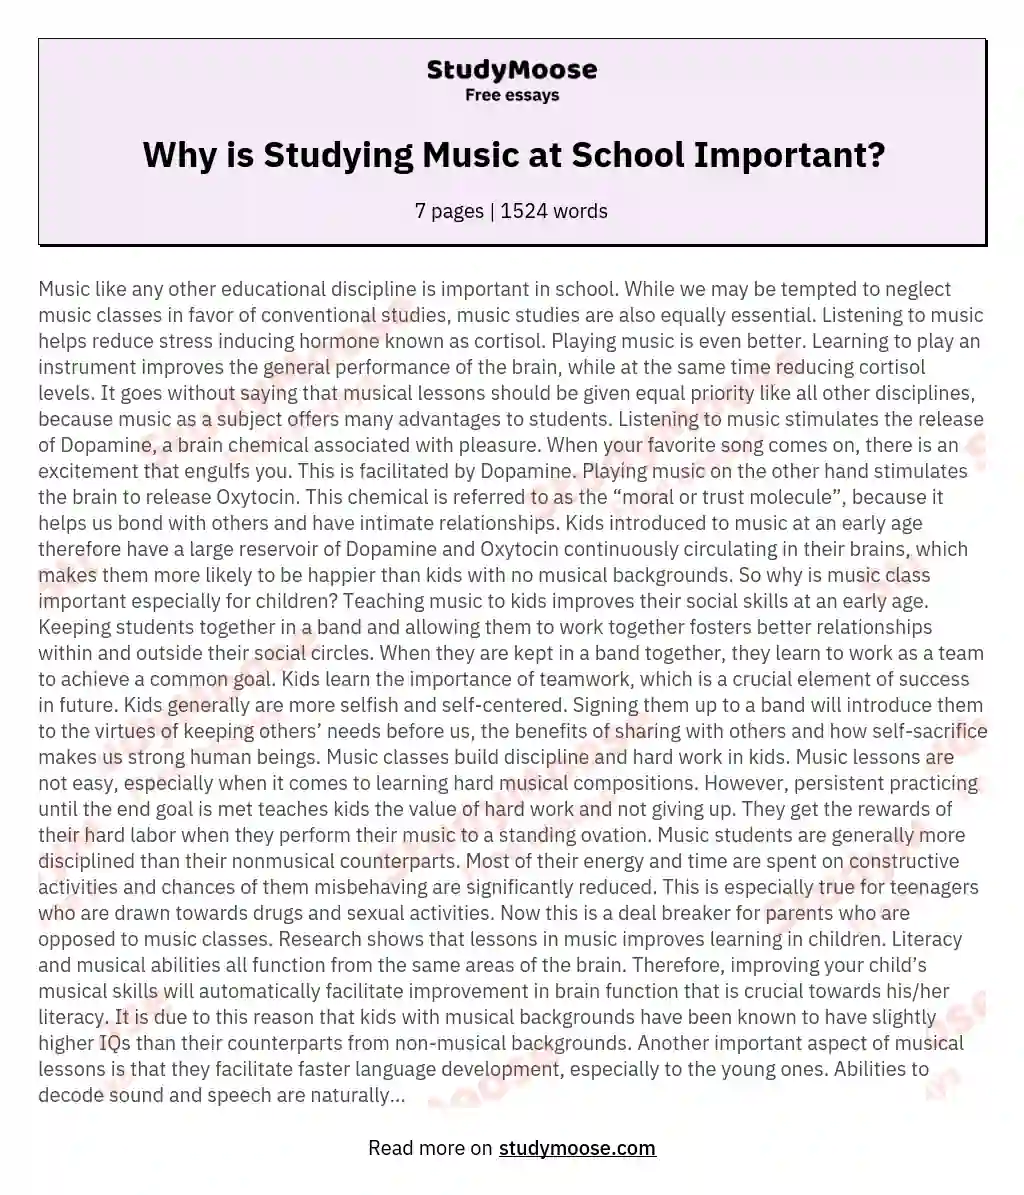 Why is Studying Music at School Important? essay